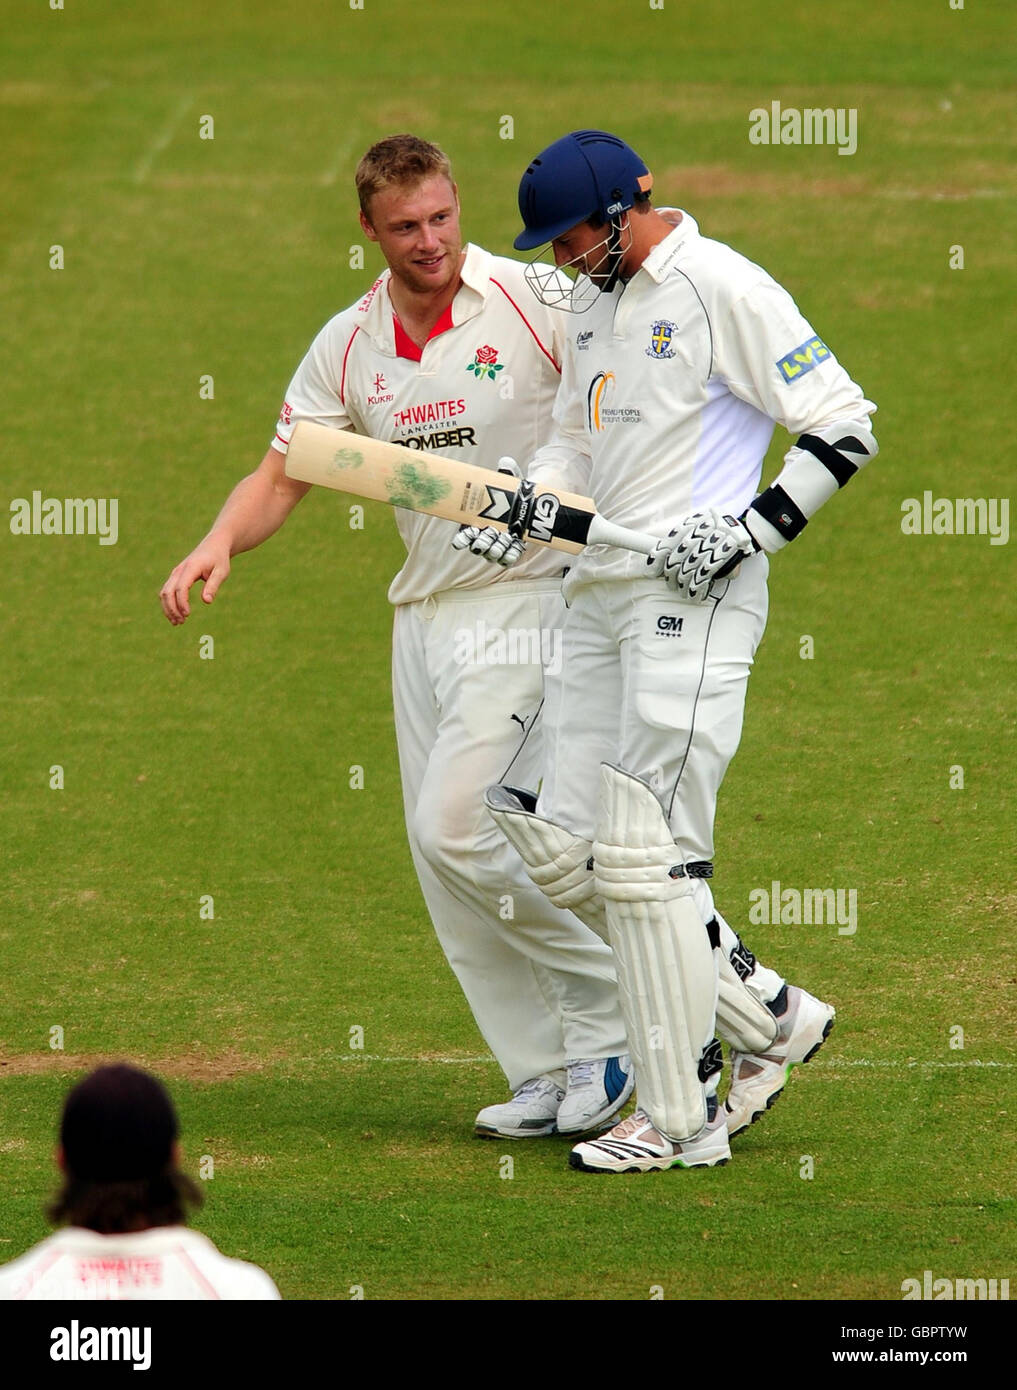 Lancashire's Andrew Flintoff celebrates taking the wicket of Durham's Steve Harmison (right) during the LV County Championship match at Riverside, Chester-le-Street. Stock Photo